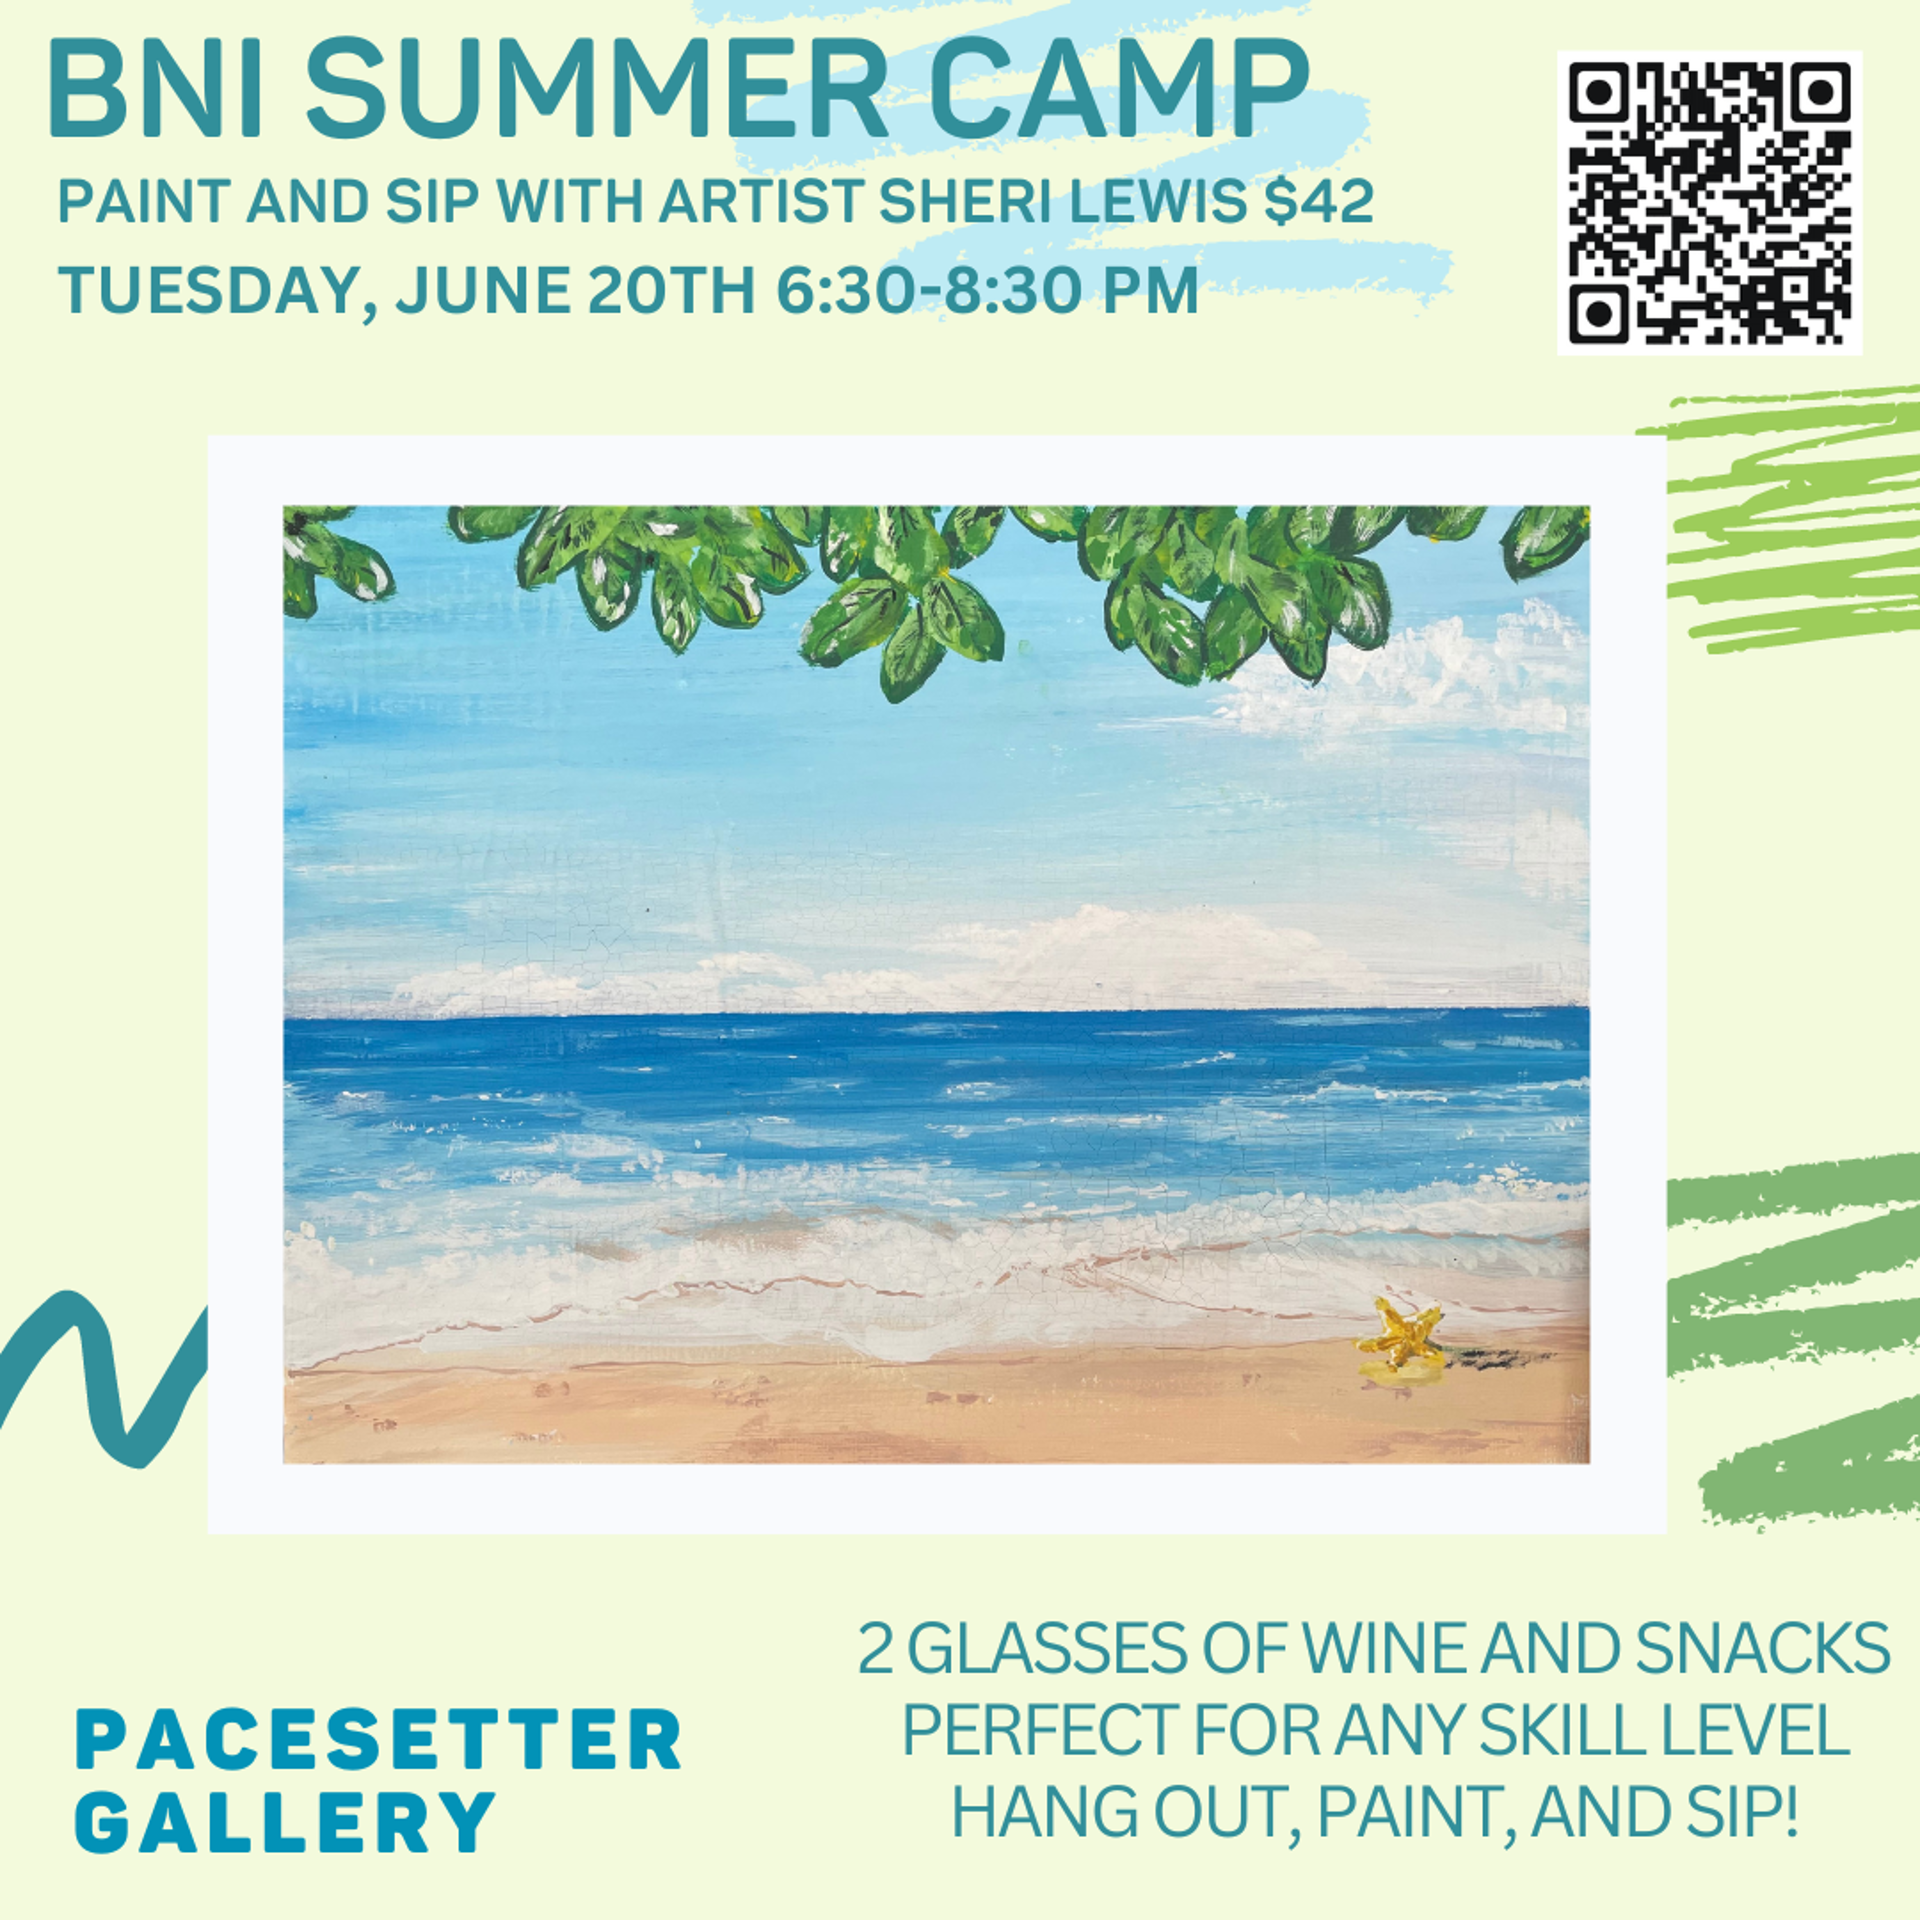 BNI SUMMER CAMP PAINT AND SIP by Pacesetter Merchandise